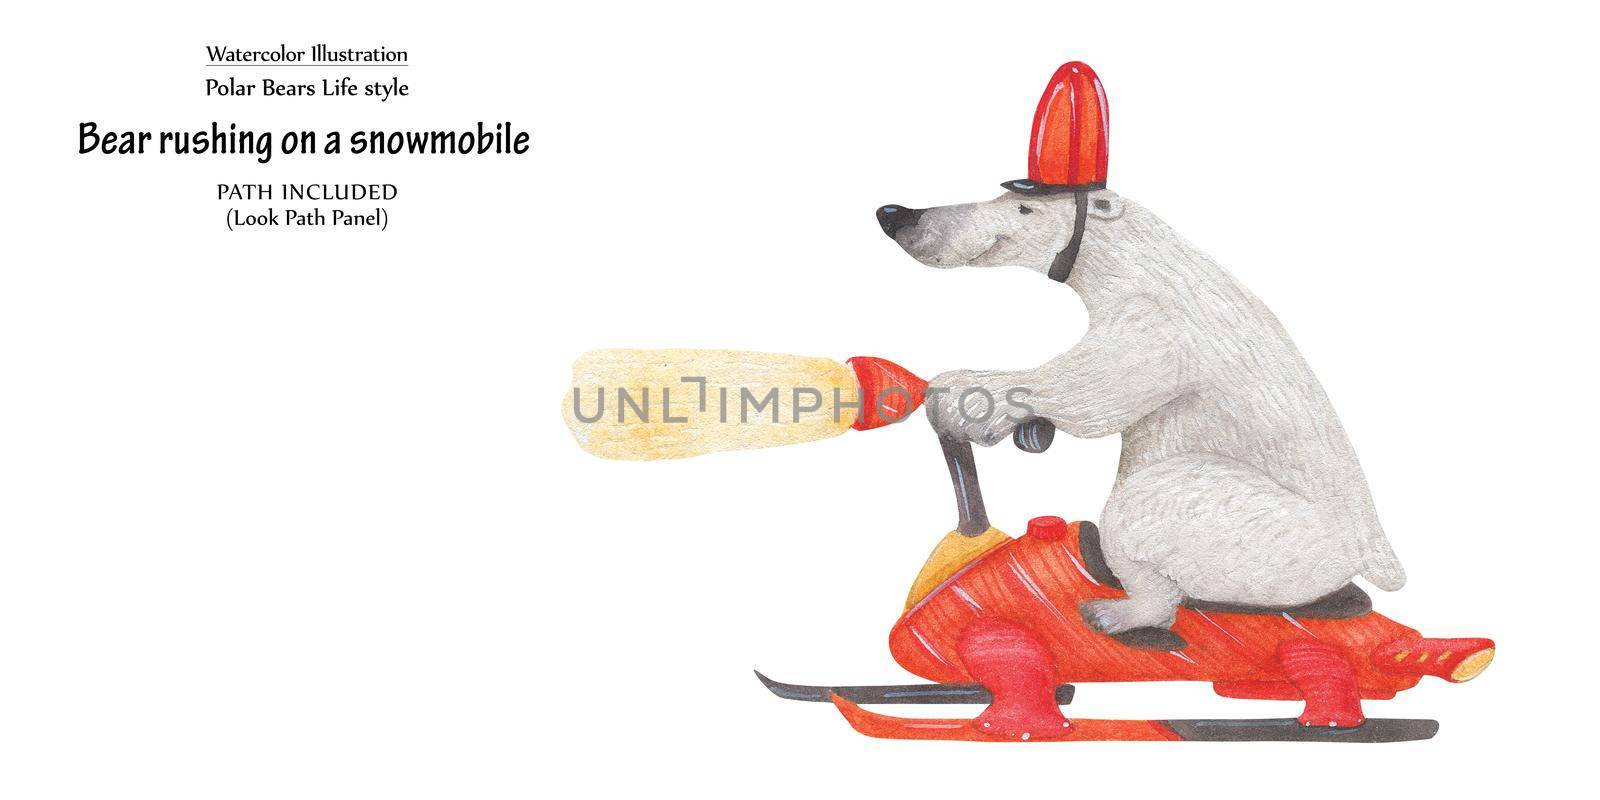 Cute watercolor illustration Bear rushing on a snowmobile. Isolated clipping path included